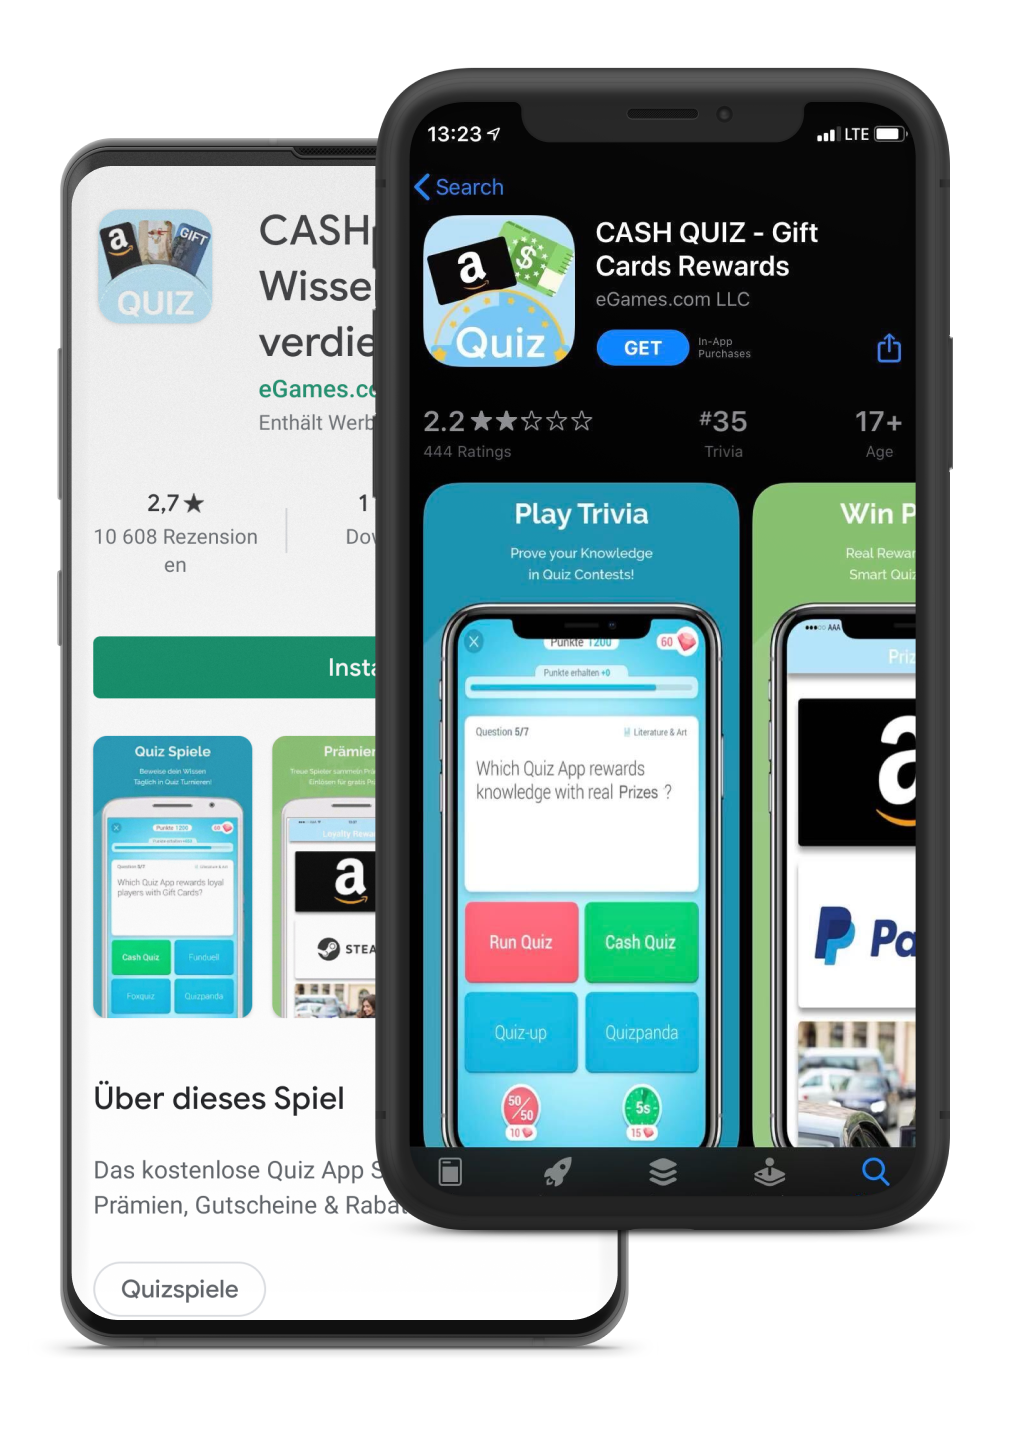 How CashQuiz Acquired 1000% More users and Became a Leading App Company